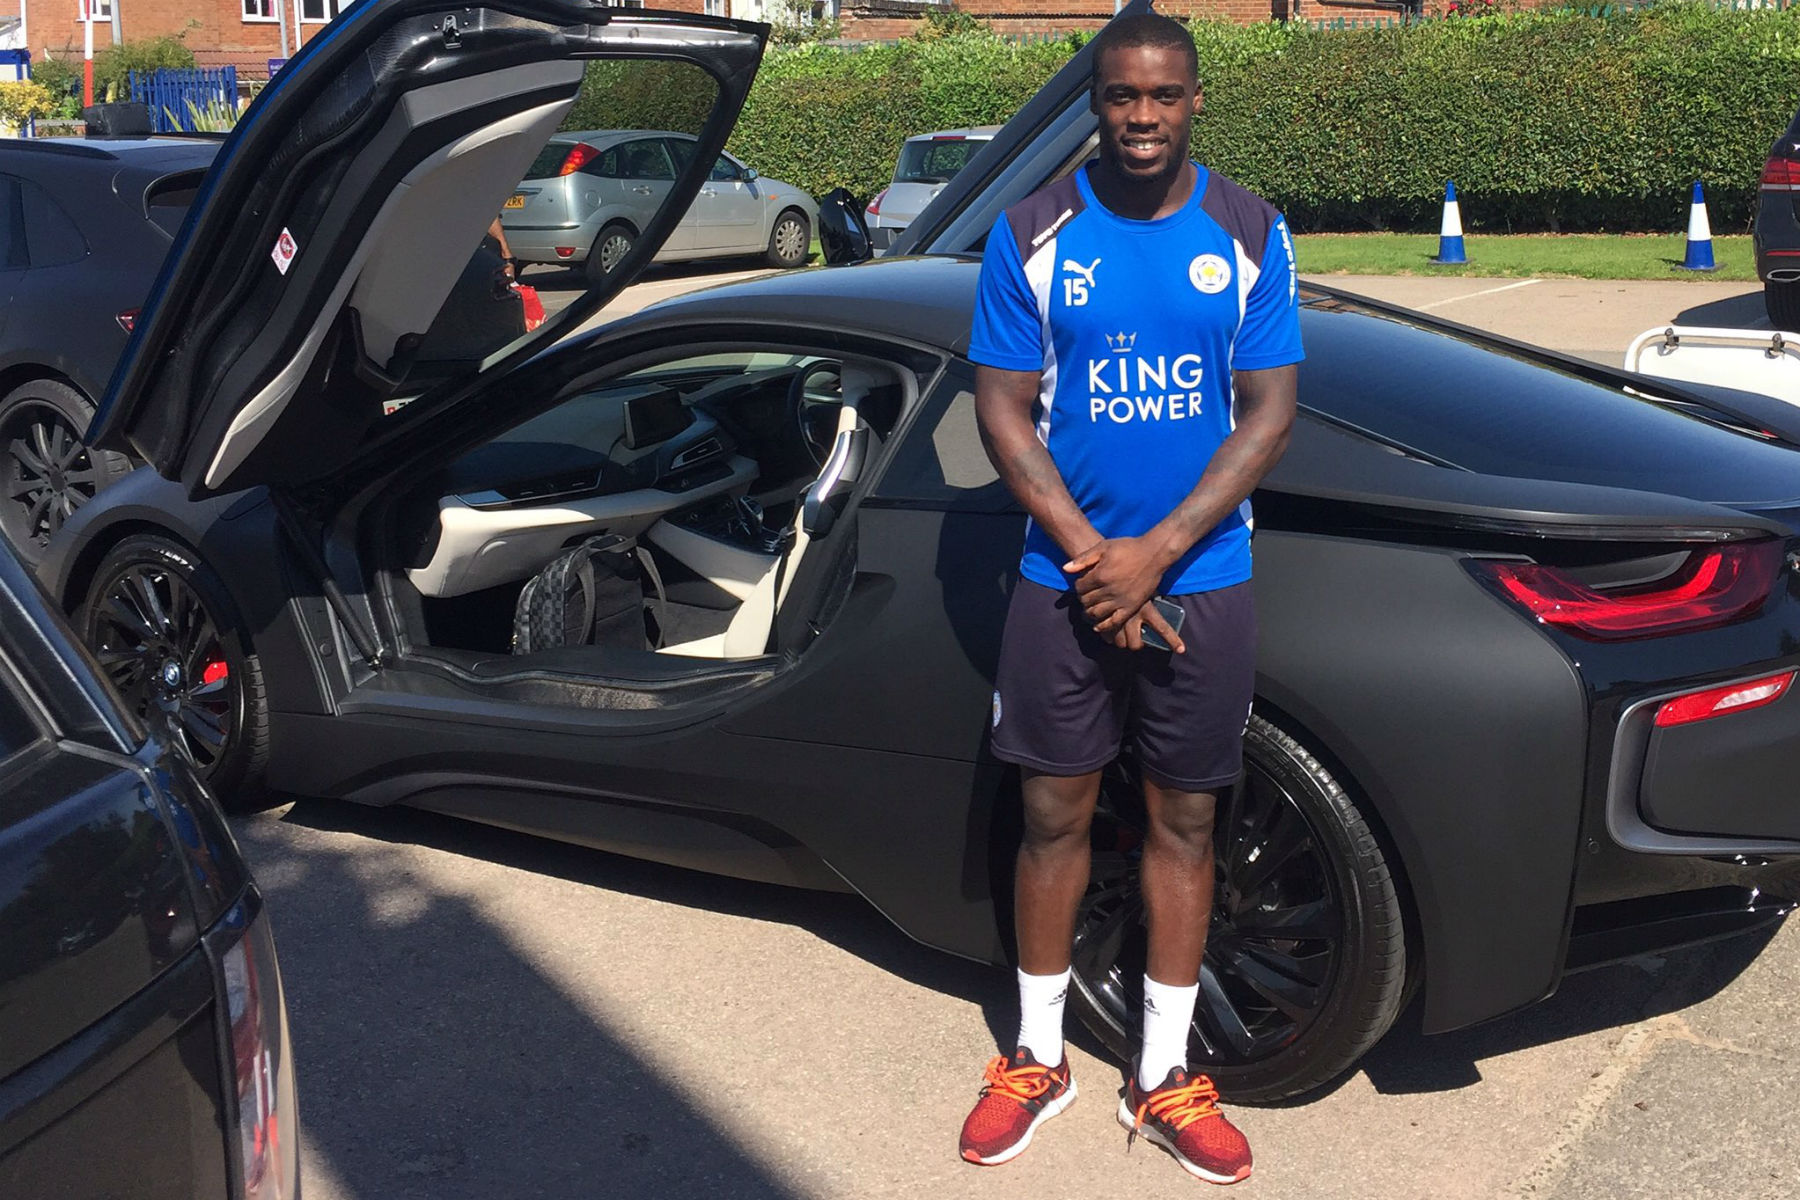 Leicester City footballers are getting their BMW i8s wrapped to avoid confusion